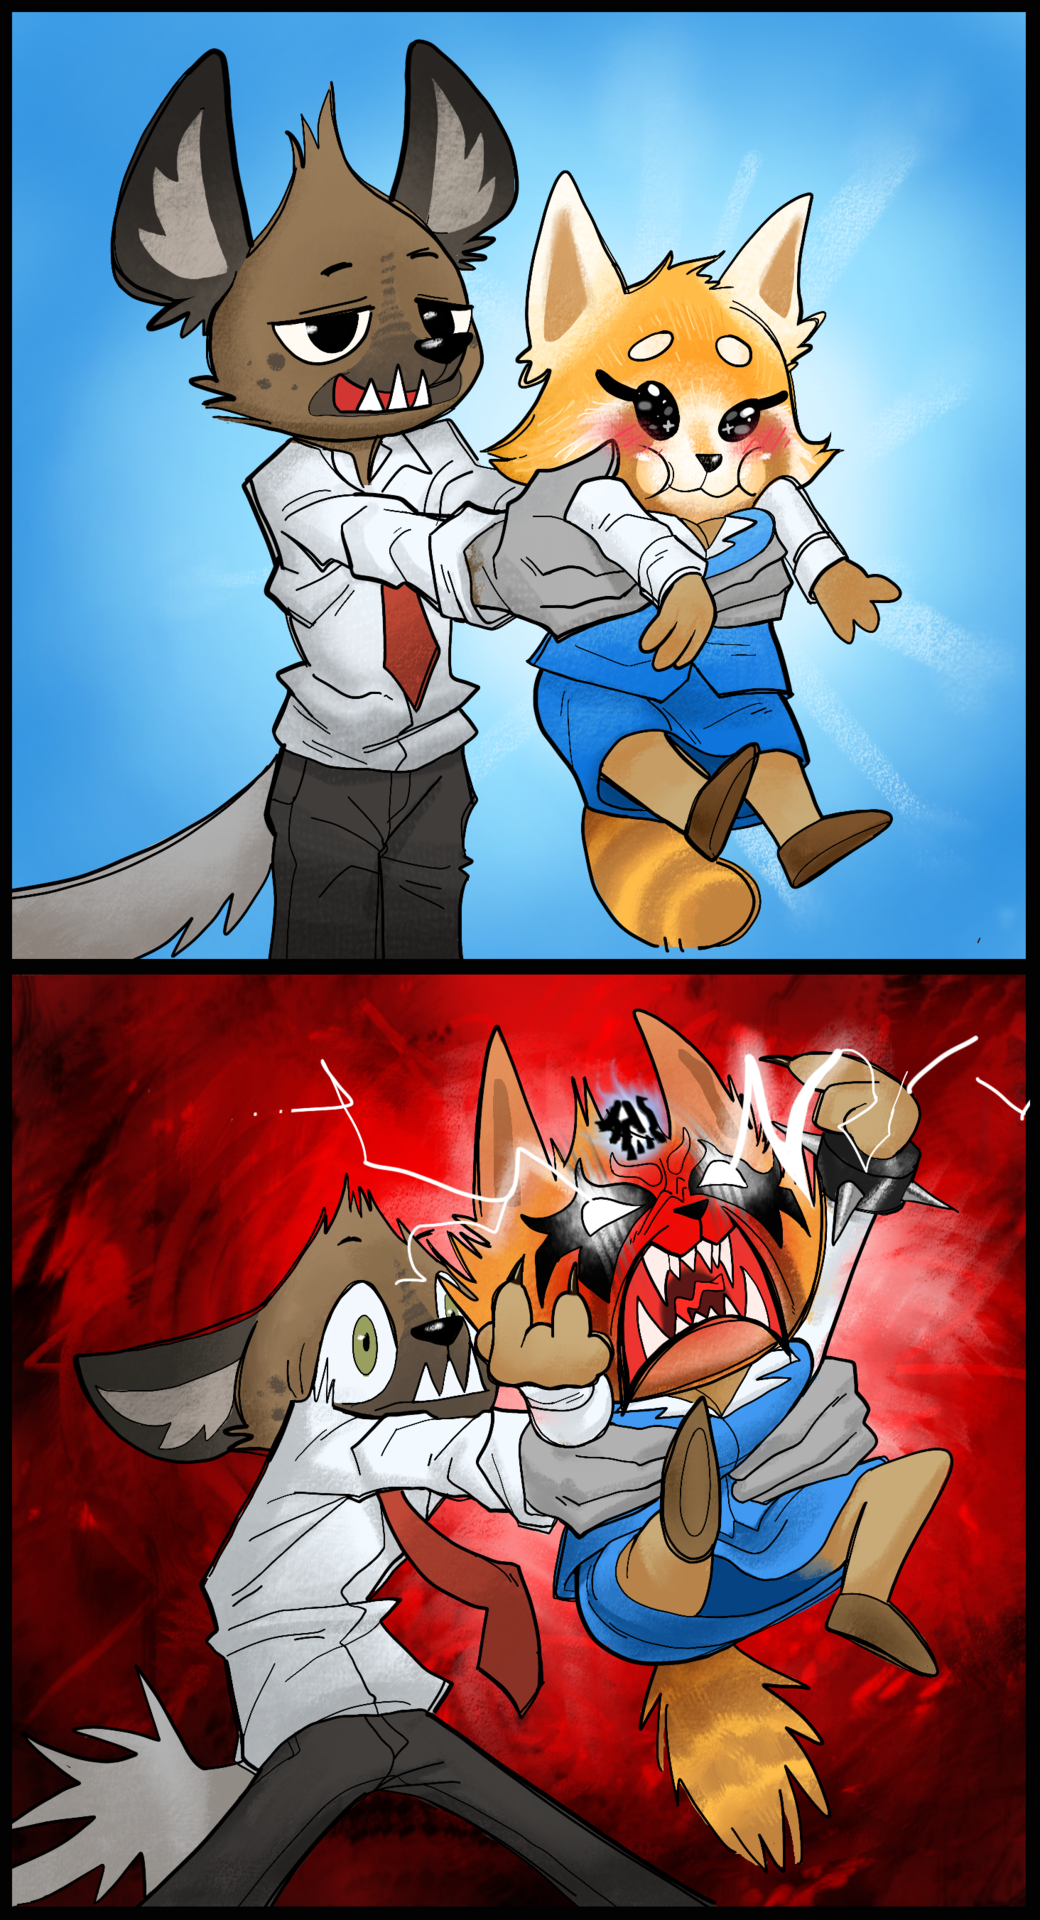 poisondynamite: Some Aggretsuko fanarts I’ve been waiting a while to draw and a